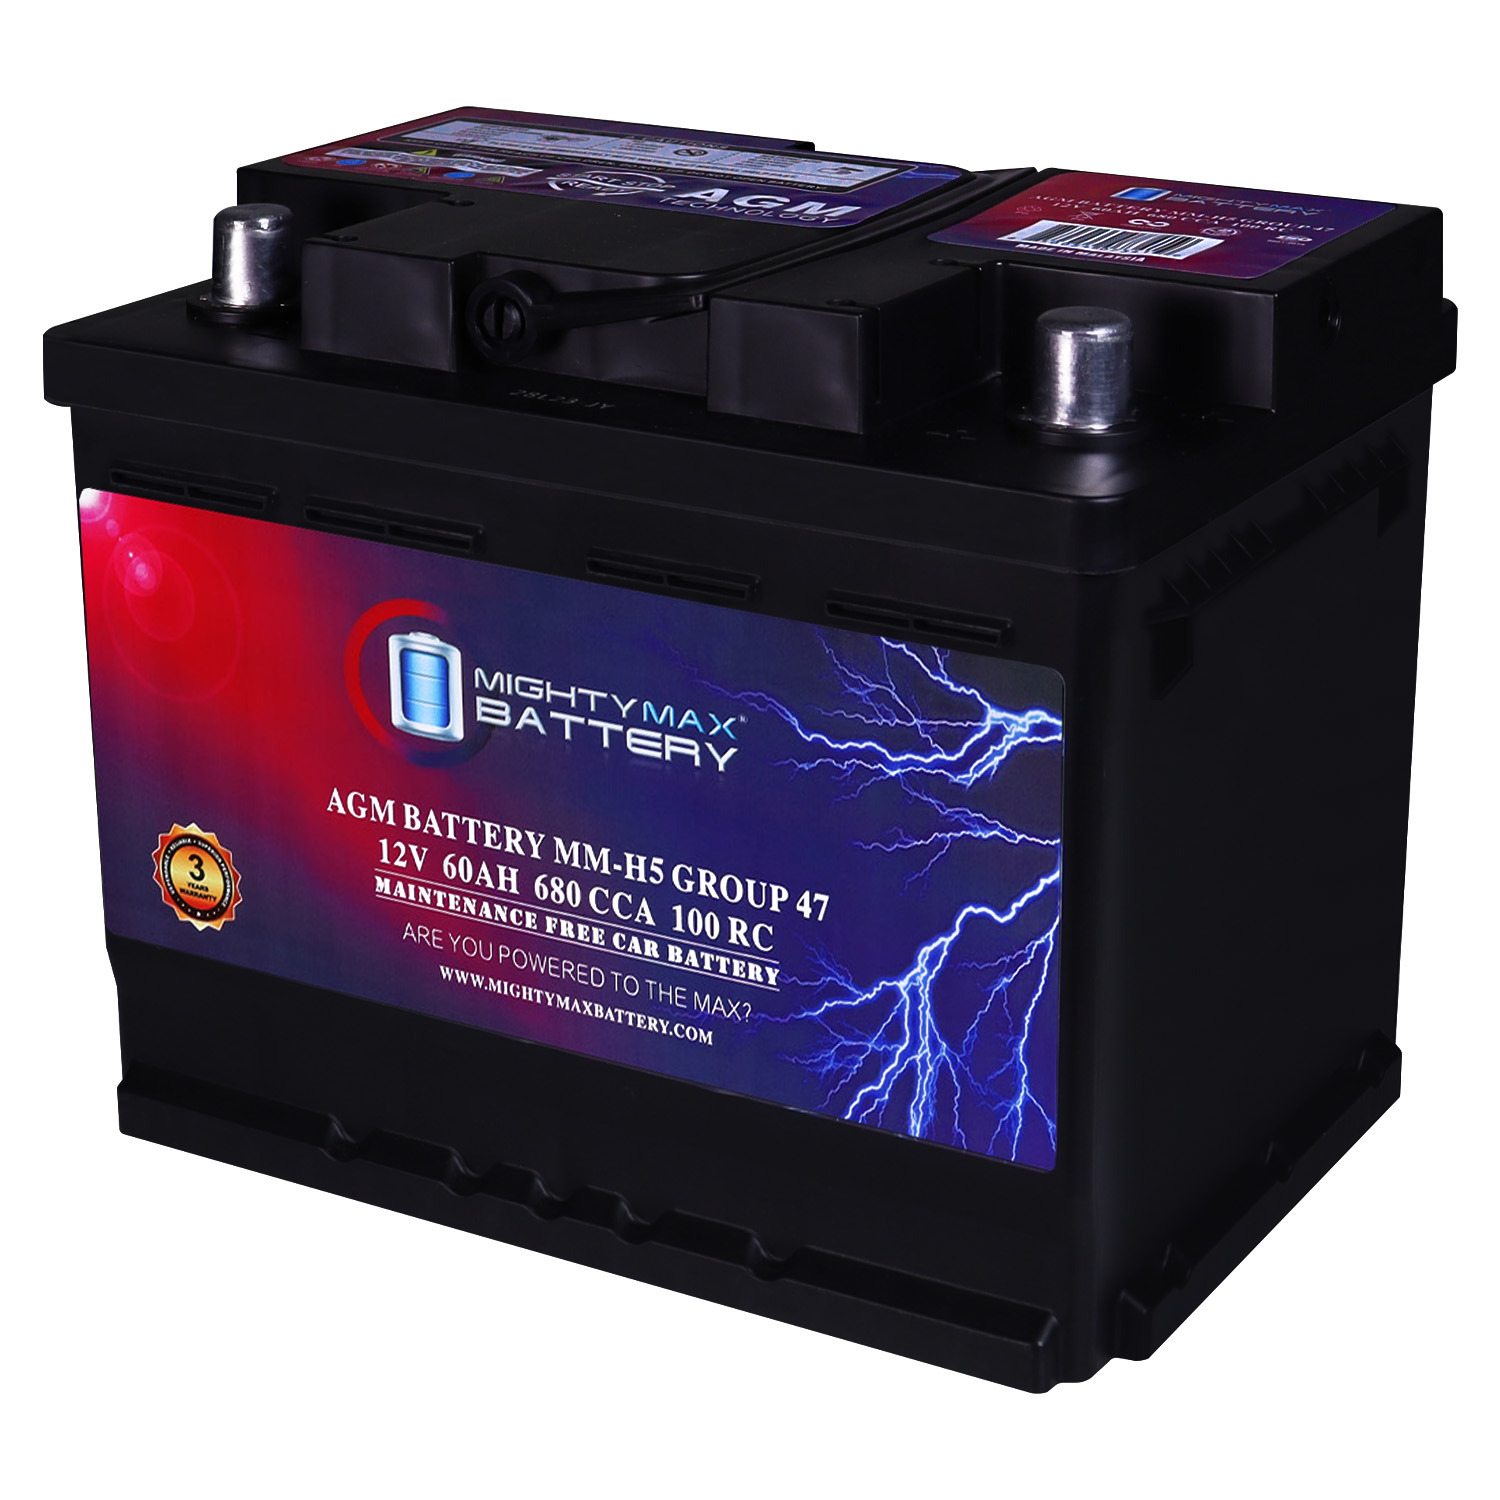 MM-H5 Group 47 12V 60AH 100RC 680CCA Replacement Battery Compatible with Audi A4 Allroad 13-16